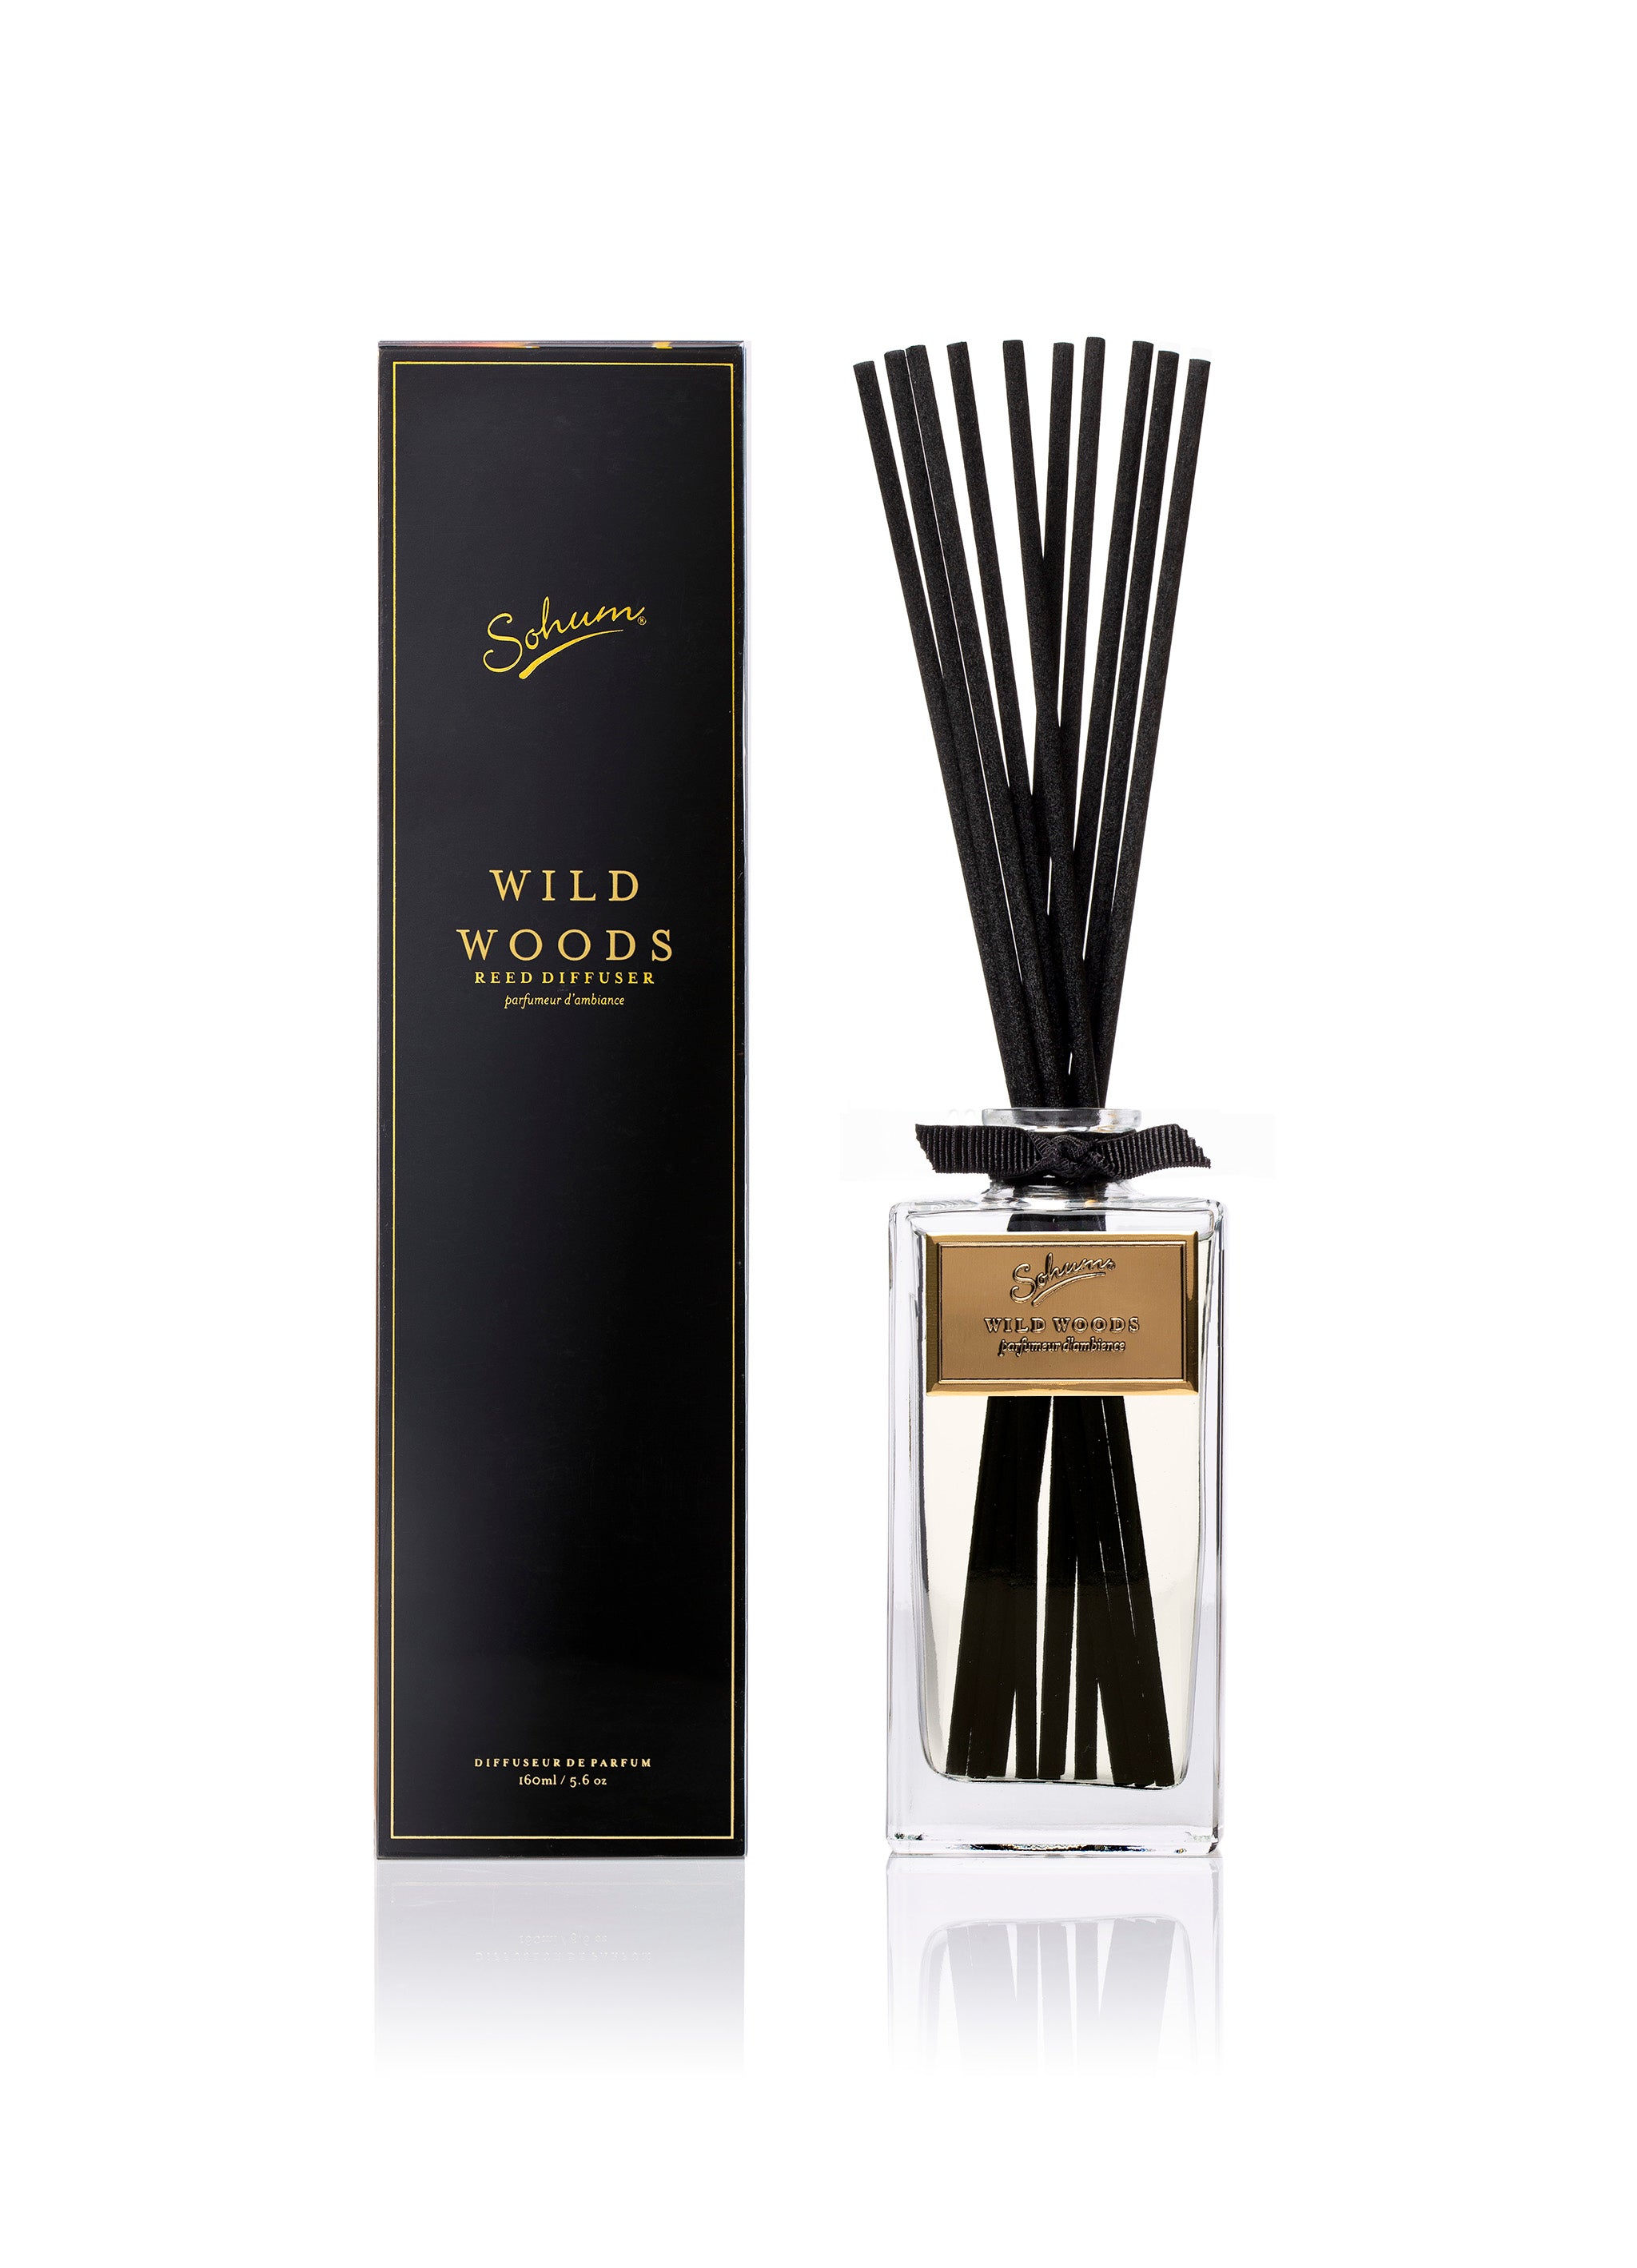 Wild Woods Reed Diffuser